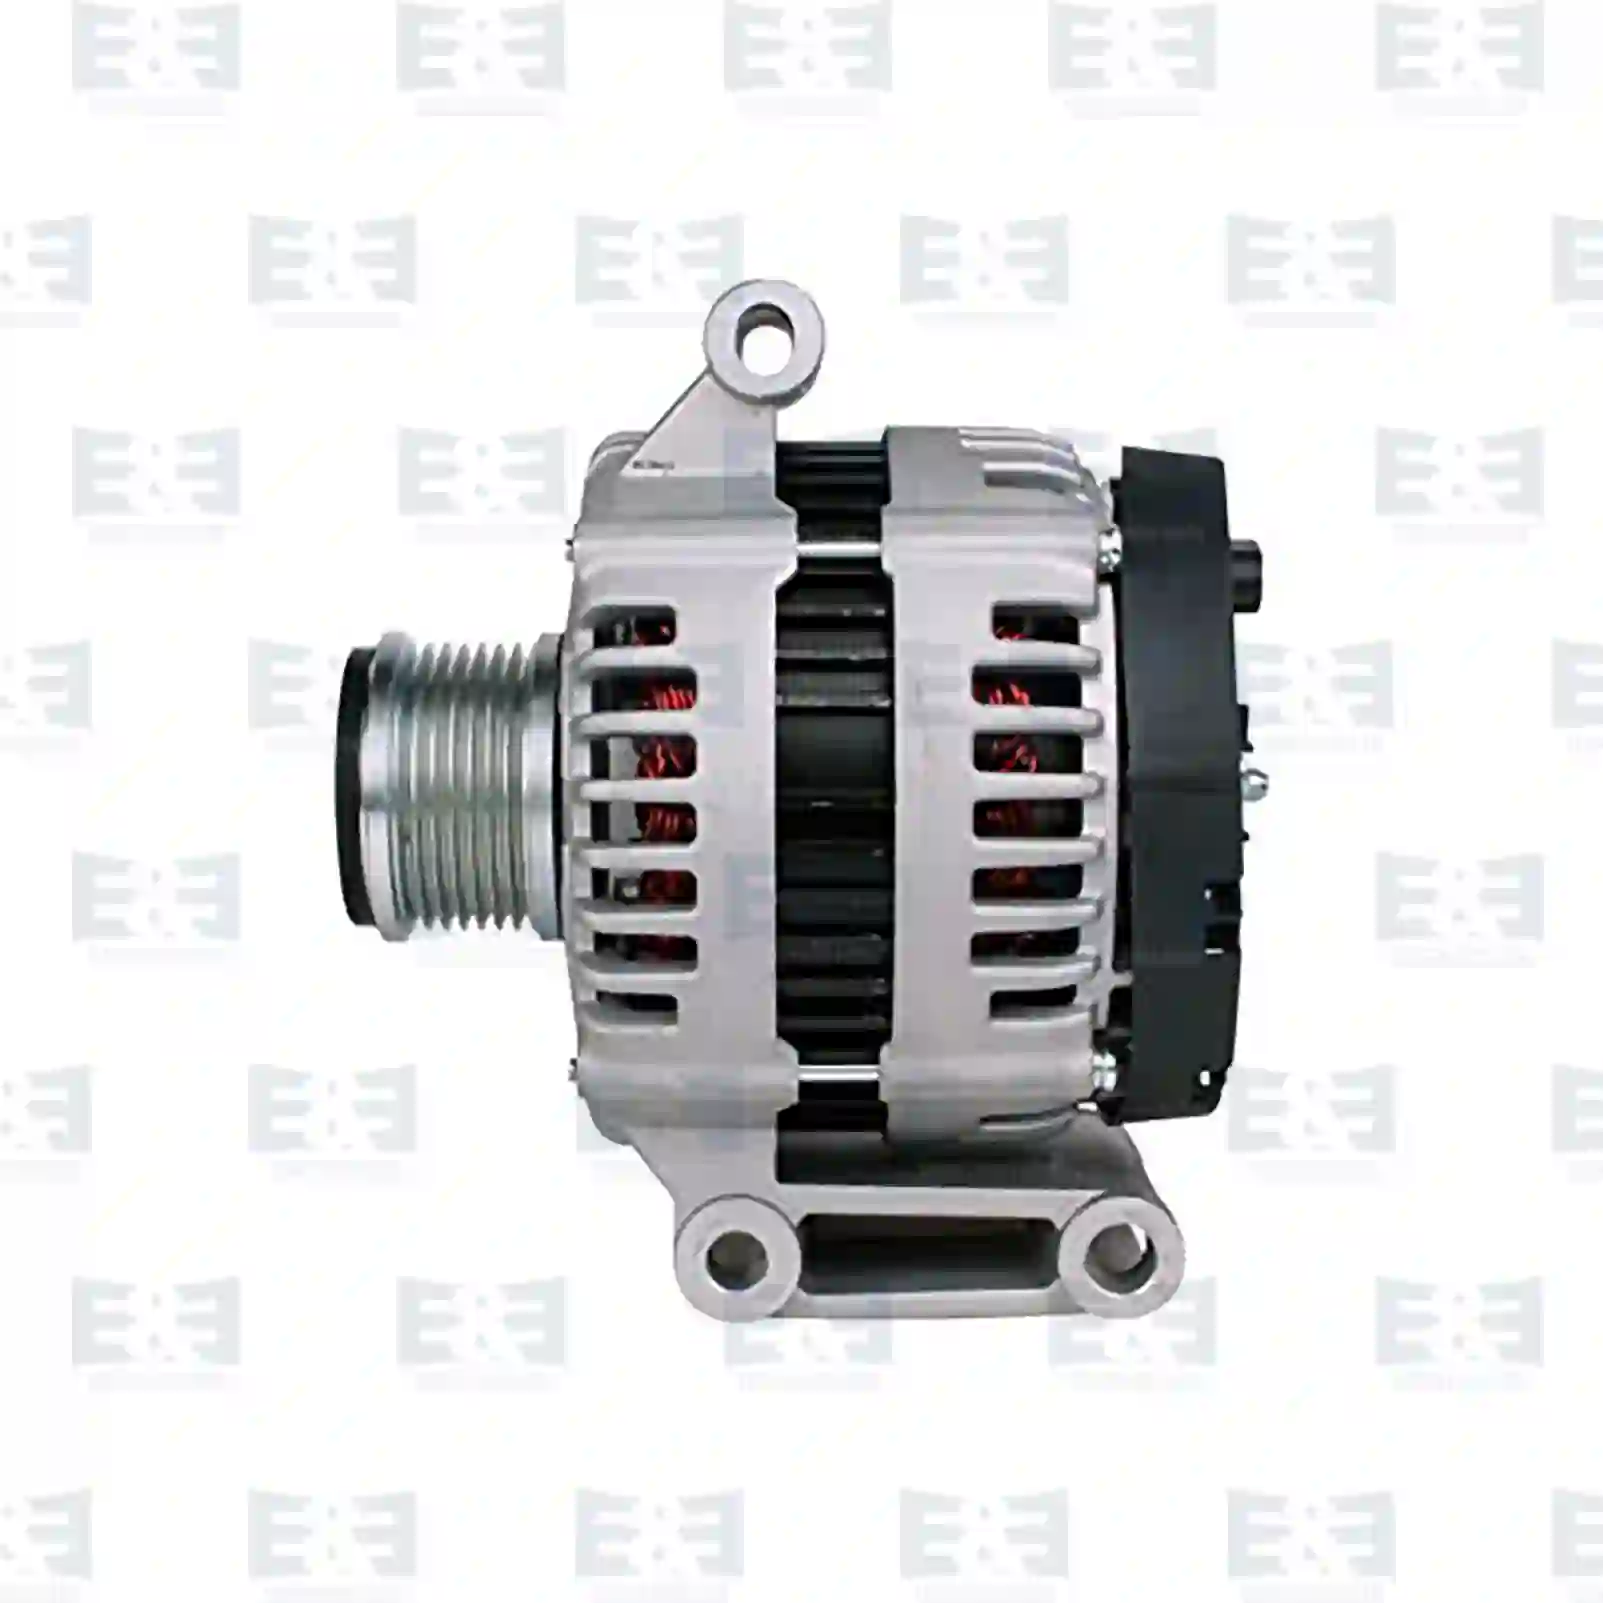 Alternator, without pulley, 2E2290082, 1372737, 1404792, 1581844, 2097255, 6C1T-10300-CA, 6C1T-10300-CB, 6C1T-10300-CC, 6C1T-10300-CD, 7H12-10300-AA, 7H1210300AA, LR008856, YLE500310, 7H1210300AA, LR008856, YLE500310 ||  2E2290082 E&E Truck Spare Parts | Truck Spare Parts, Auotomotive Spare Parts Alternator, without pulley, 2E2290082, 1372737, 1404792, 1581844, 2097255, 6C1T-10300-CA, 6C1T-10300-CB, 6C1T-10300-CC, 6C1T-10300-CD, 7H12-10300-AA, 7H1210300AA, LR008856, YLE500310, 7H1210300AA, LR008856, YLE500310 ||  2E2290082 E&E Truck Spare Parts | Truck Spare Parts, Auotomotive Spare Parts